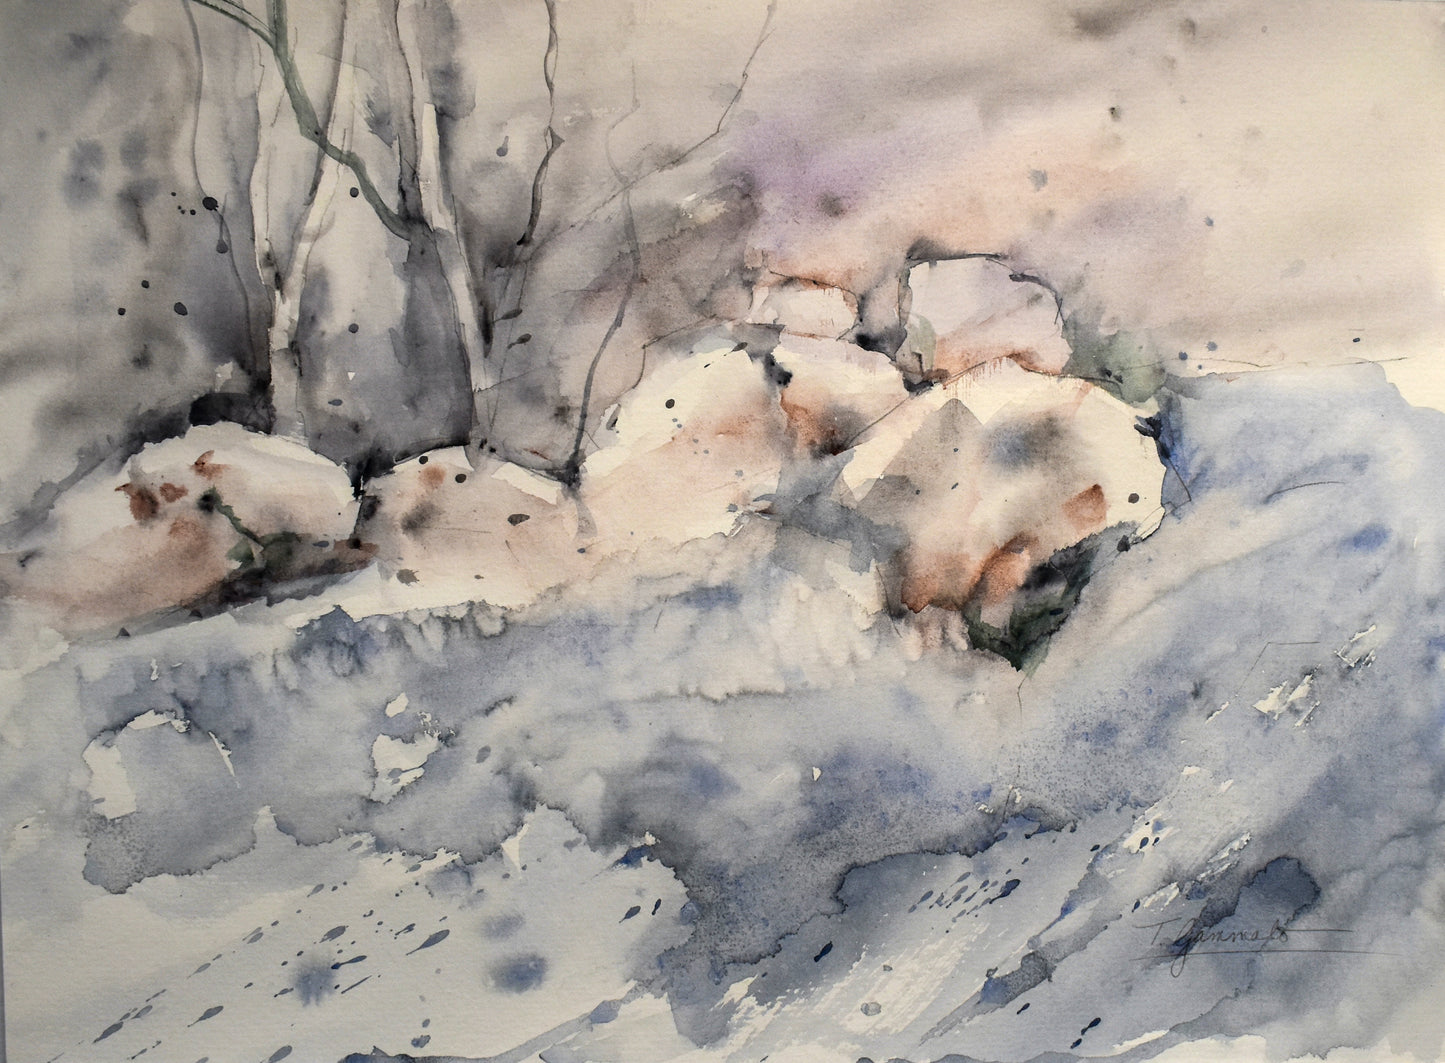 Original watercolor depicting a snow scene in nature with boulders and barren trees. Hues of grey, white and tans; artist Teri Gammalo; 15"Wx11"H